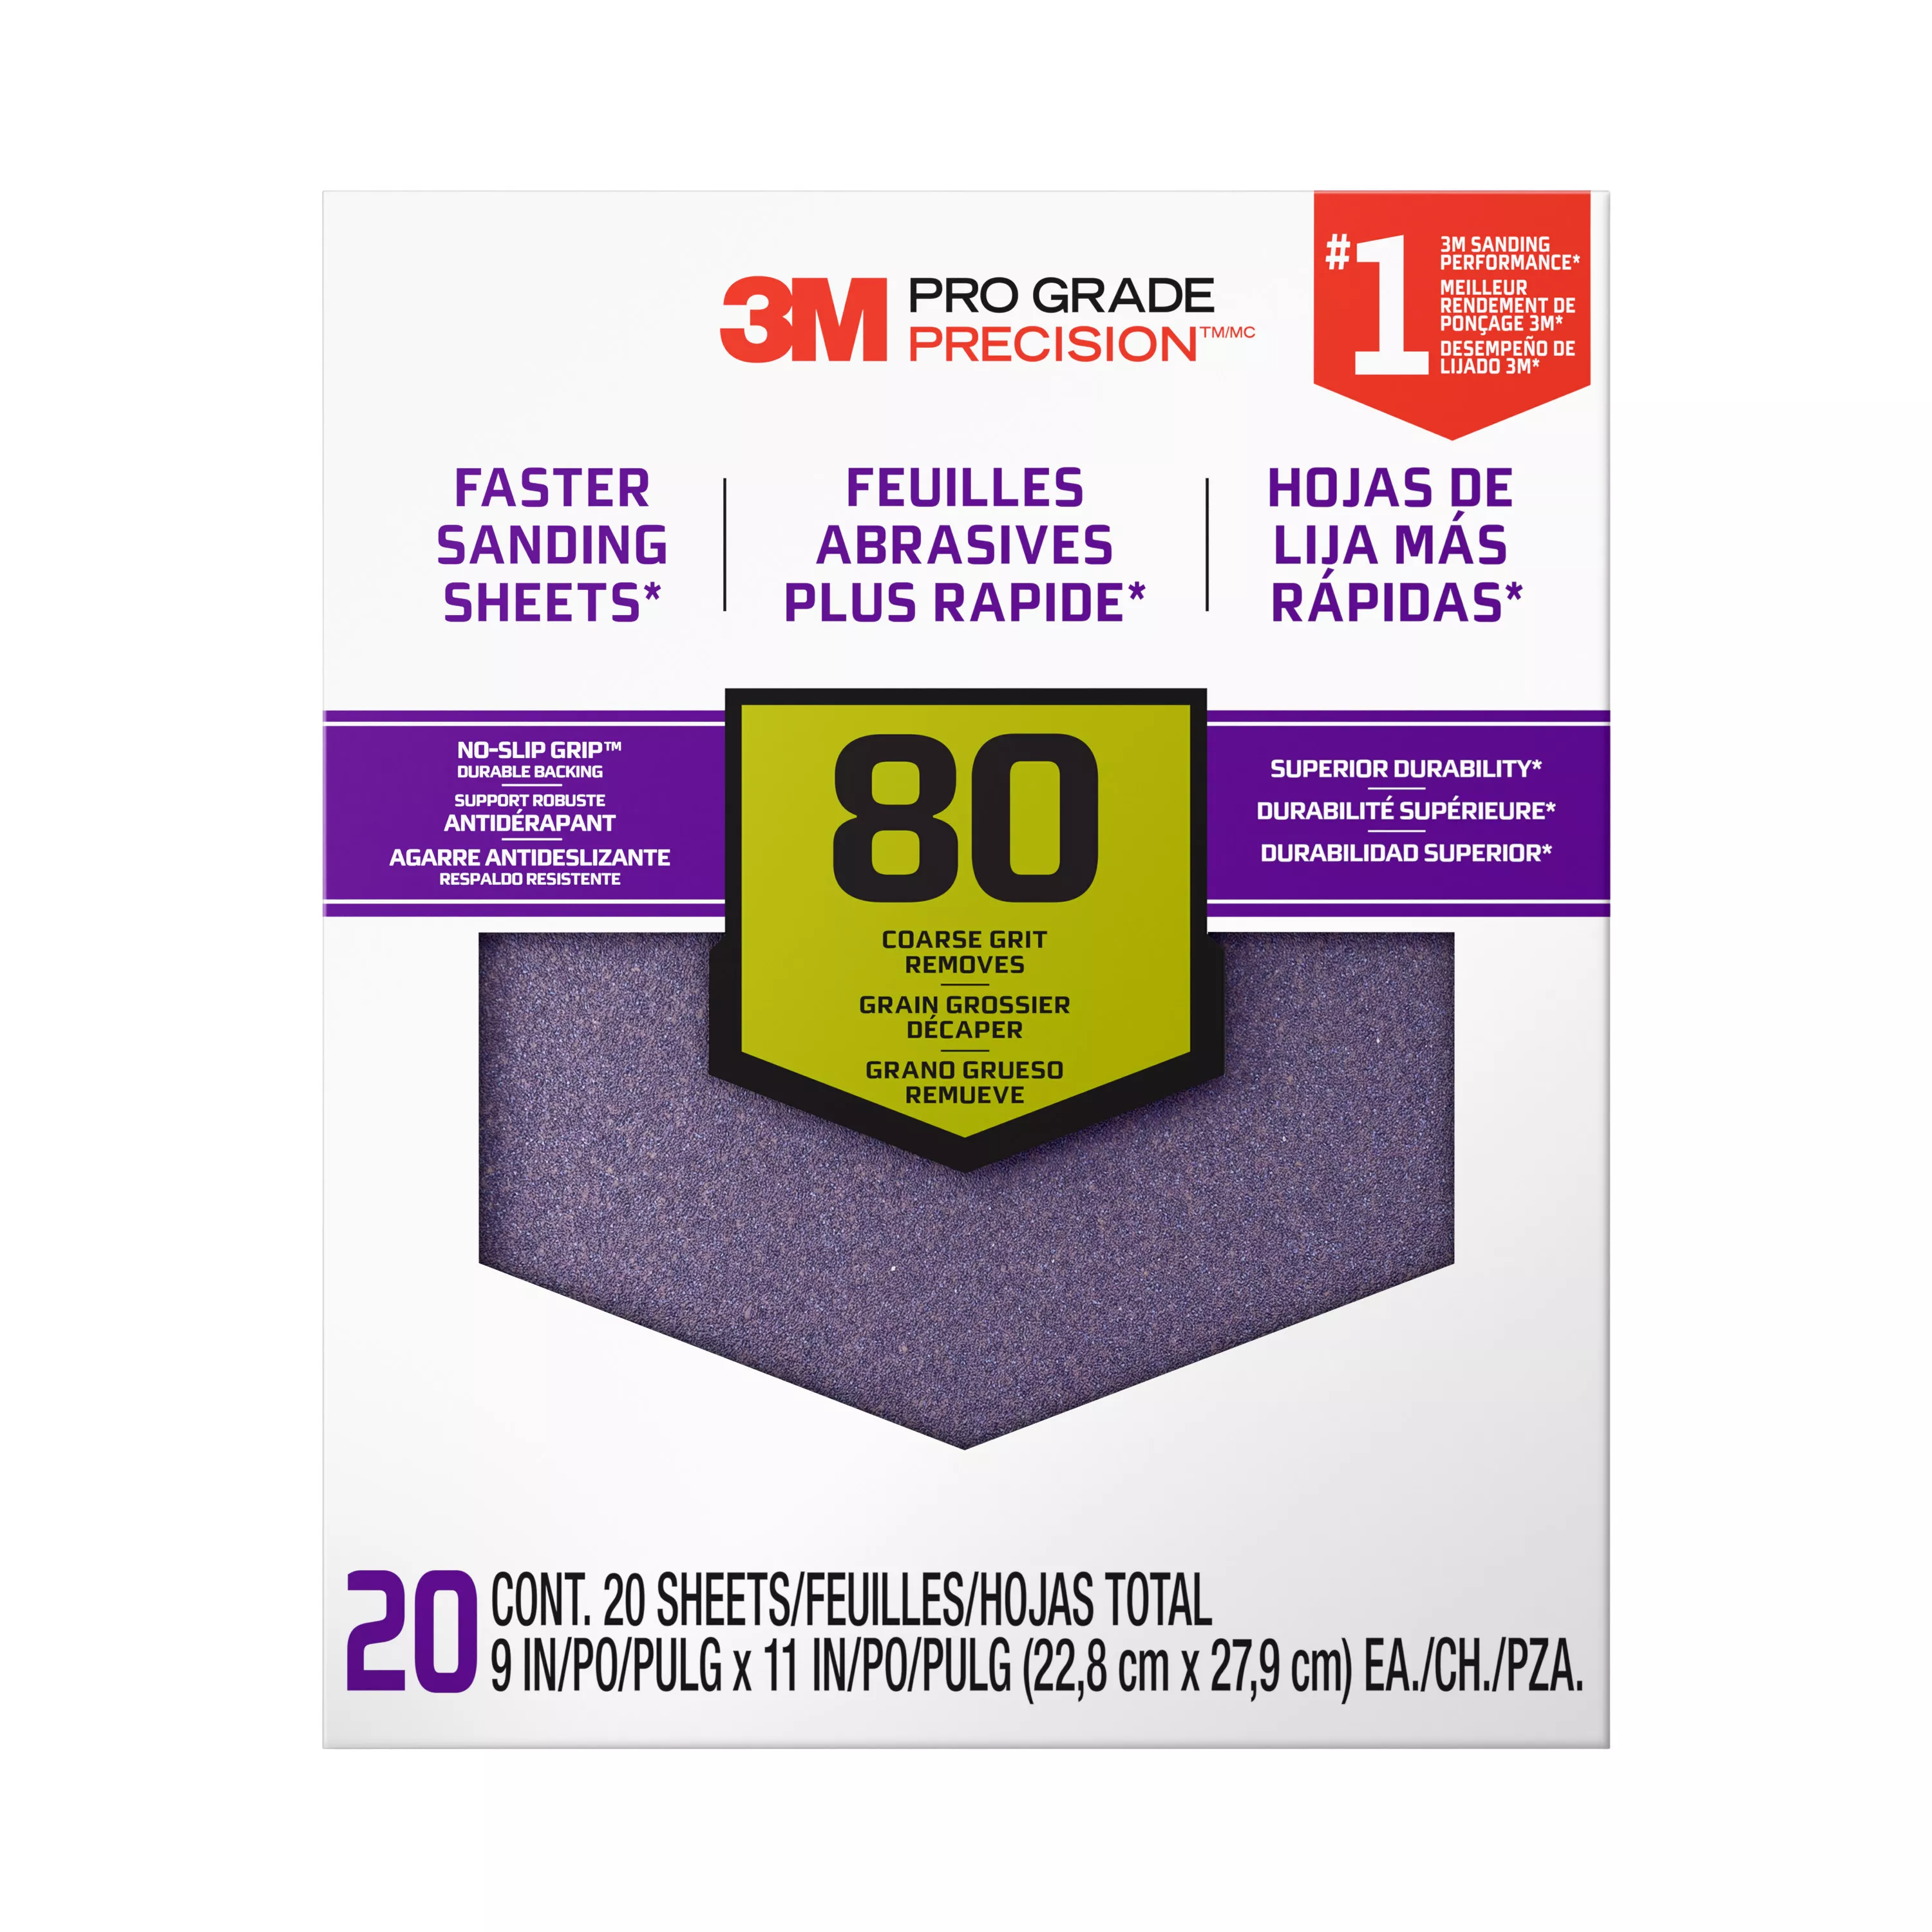 3M™ Pro Grade Precision™ Faster Sanding Sheets w/ NO-SLIP GRIP™ Backing SHCP80-PGP20T, 9 in x 11 in, 80 Gr, 20 Shts/pk